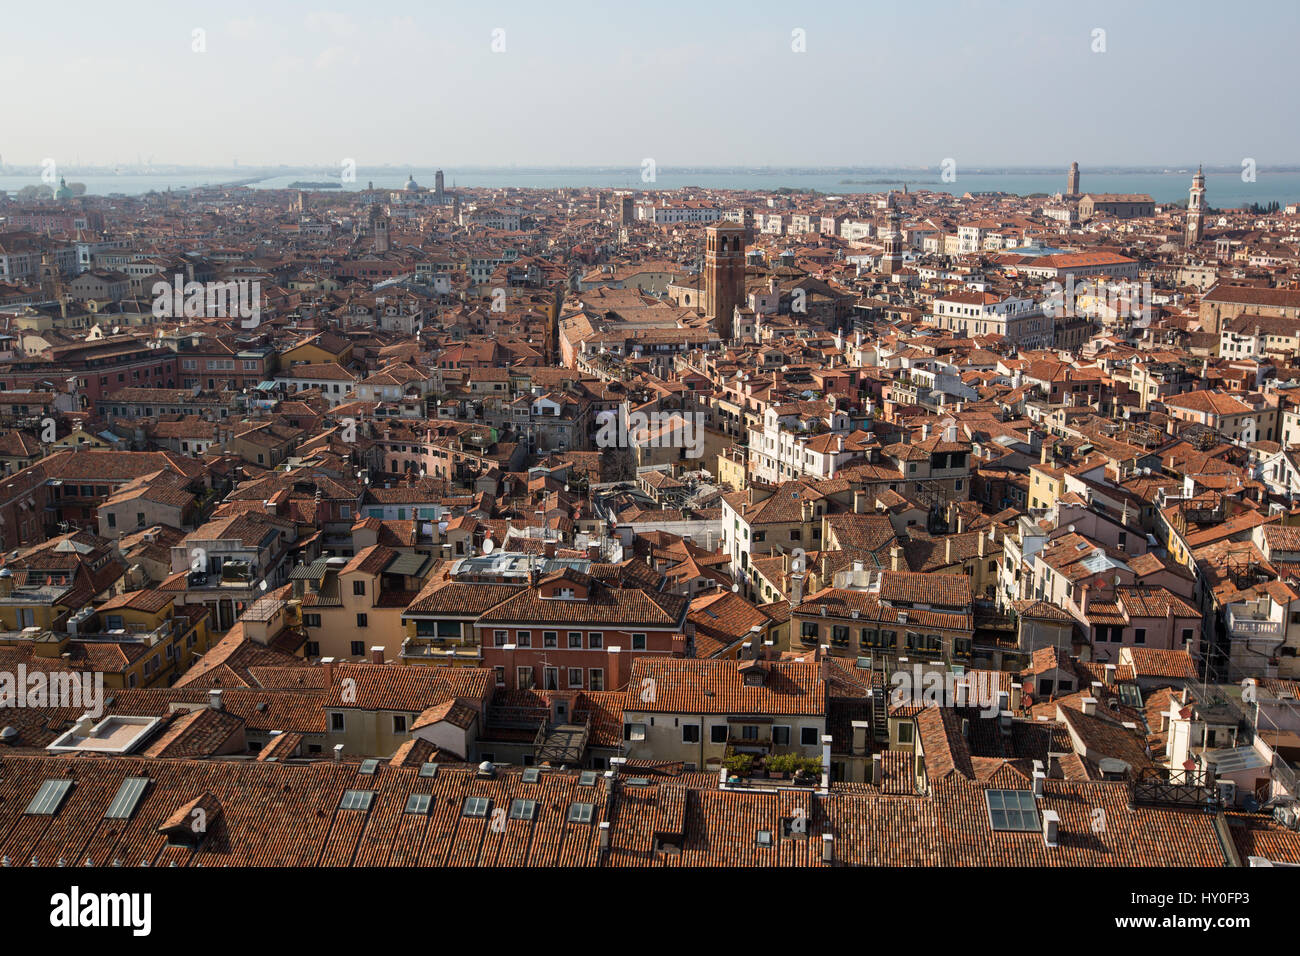 Venice rooftops view from above, from the Campanile, St Marks Square, Venice, Italy Europe Stock Photo